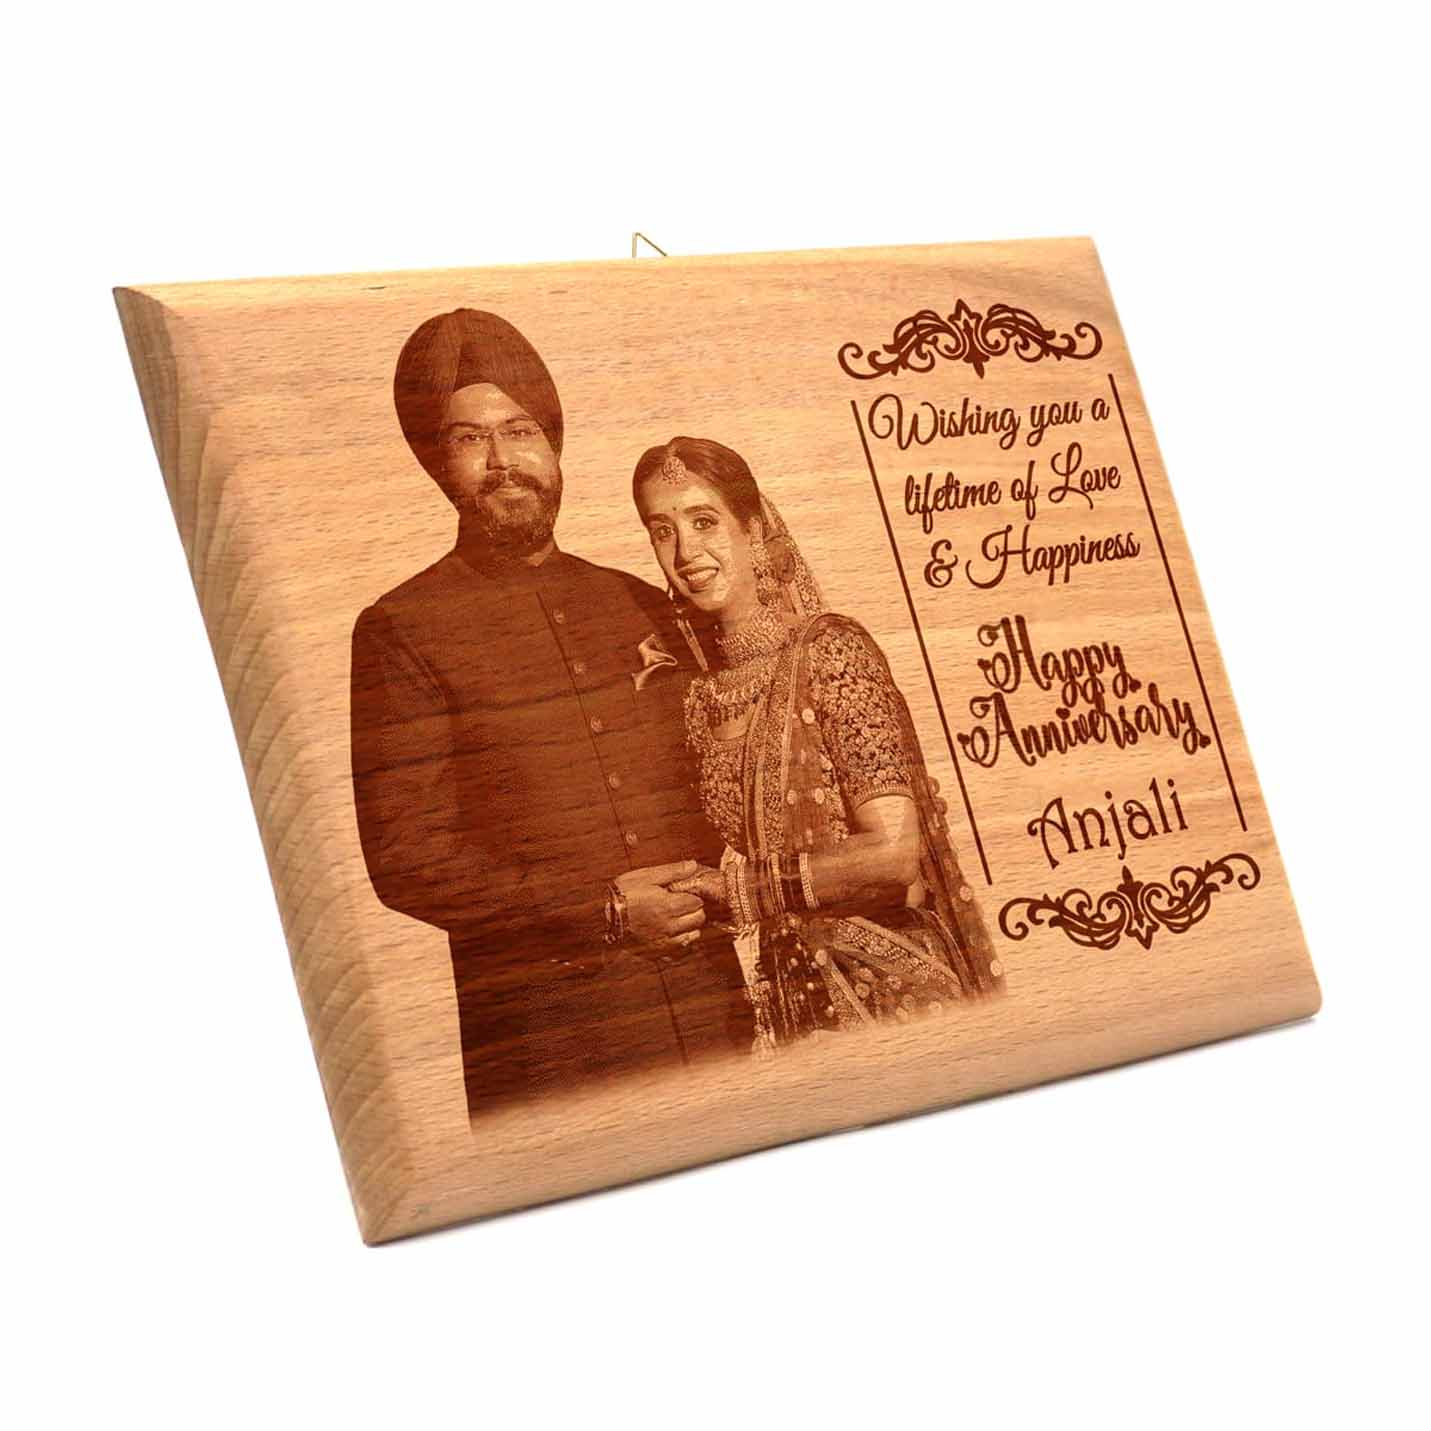 Buy Personalized Gifts Online India at Discounted Prices Now | Personalized  photo gifts, Online gifts, Personalized gifts